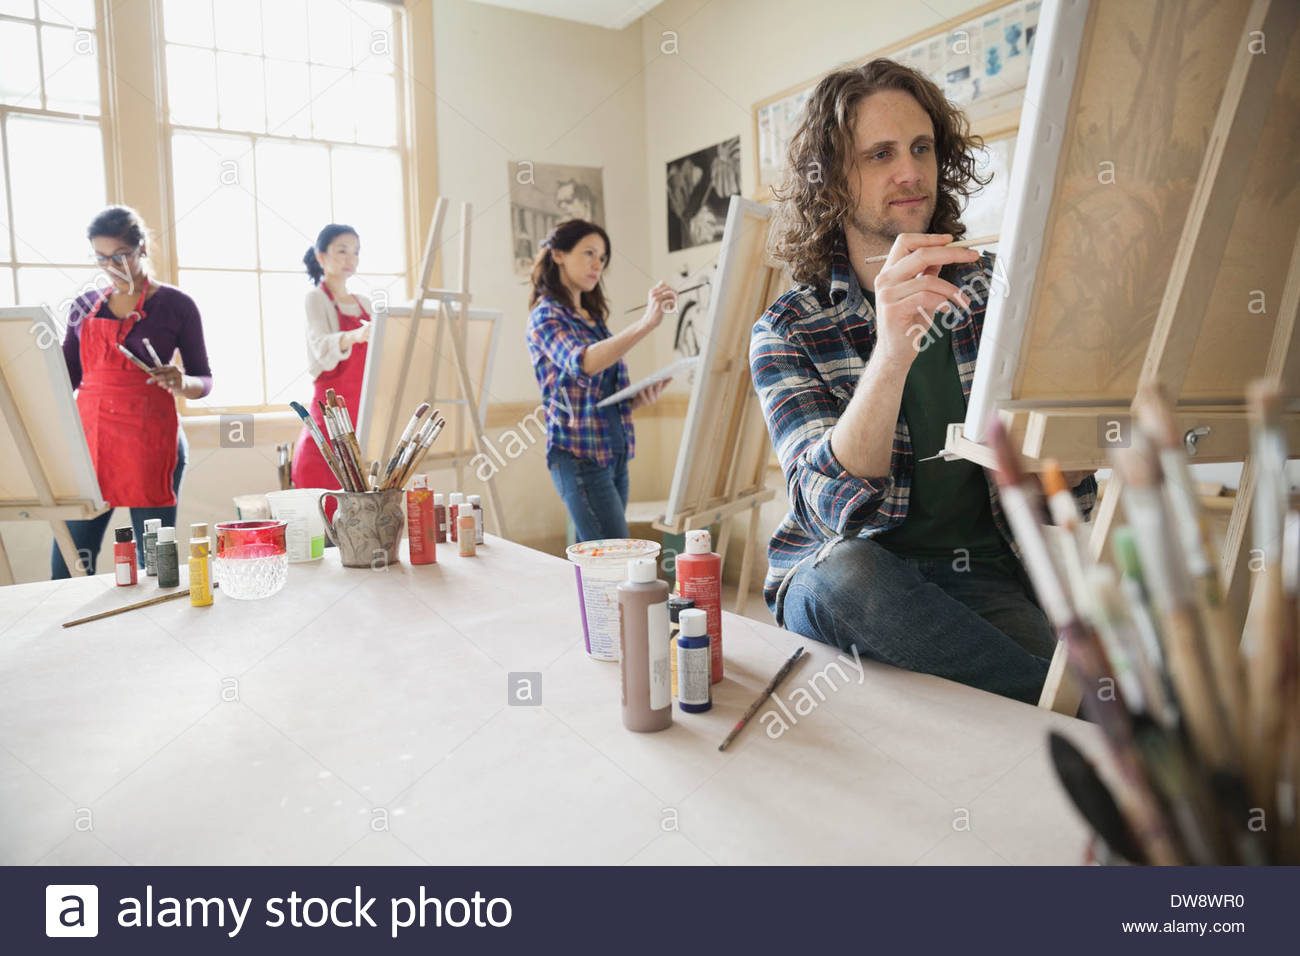 Adult students painting in art studio using easels Stock Photo